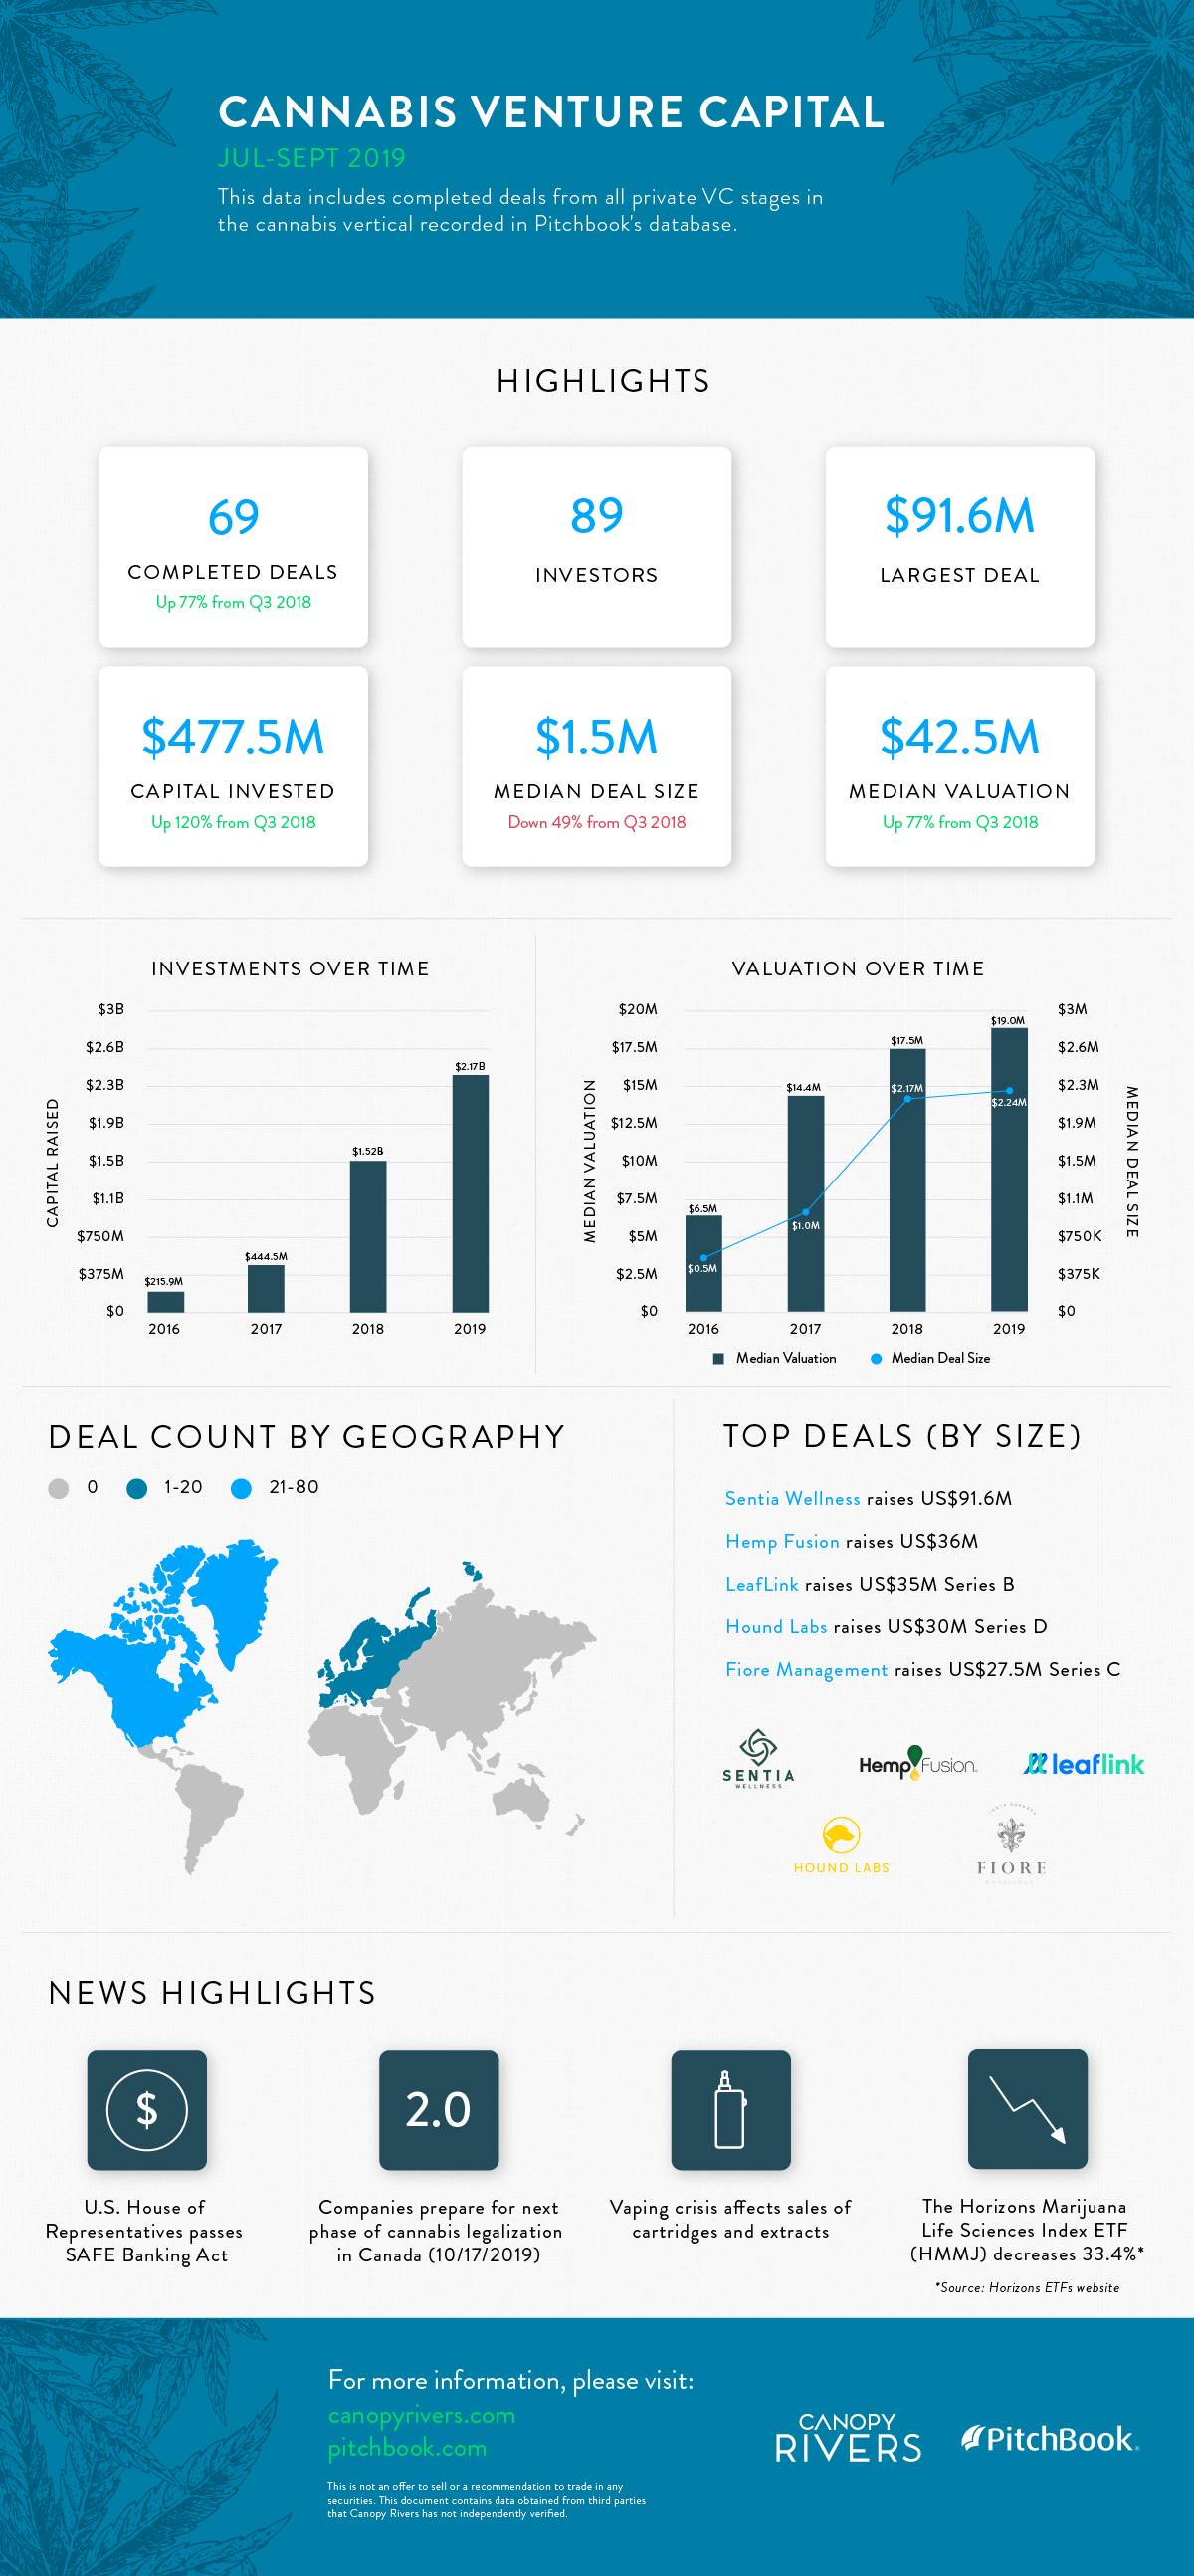 Cannabis venture capital data highlights from July to October 2019